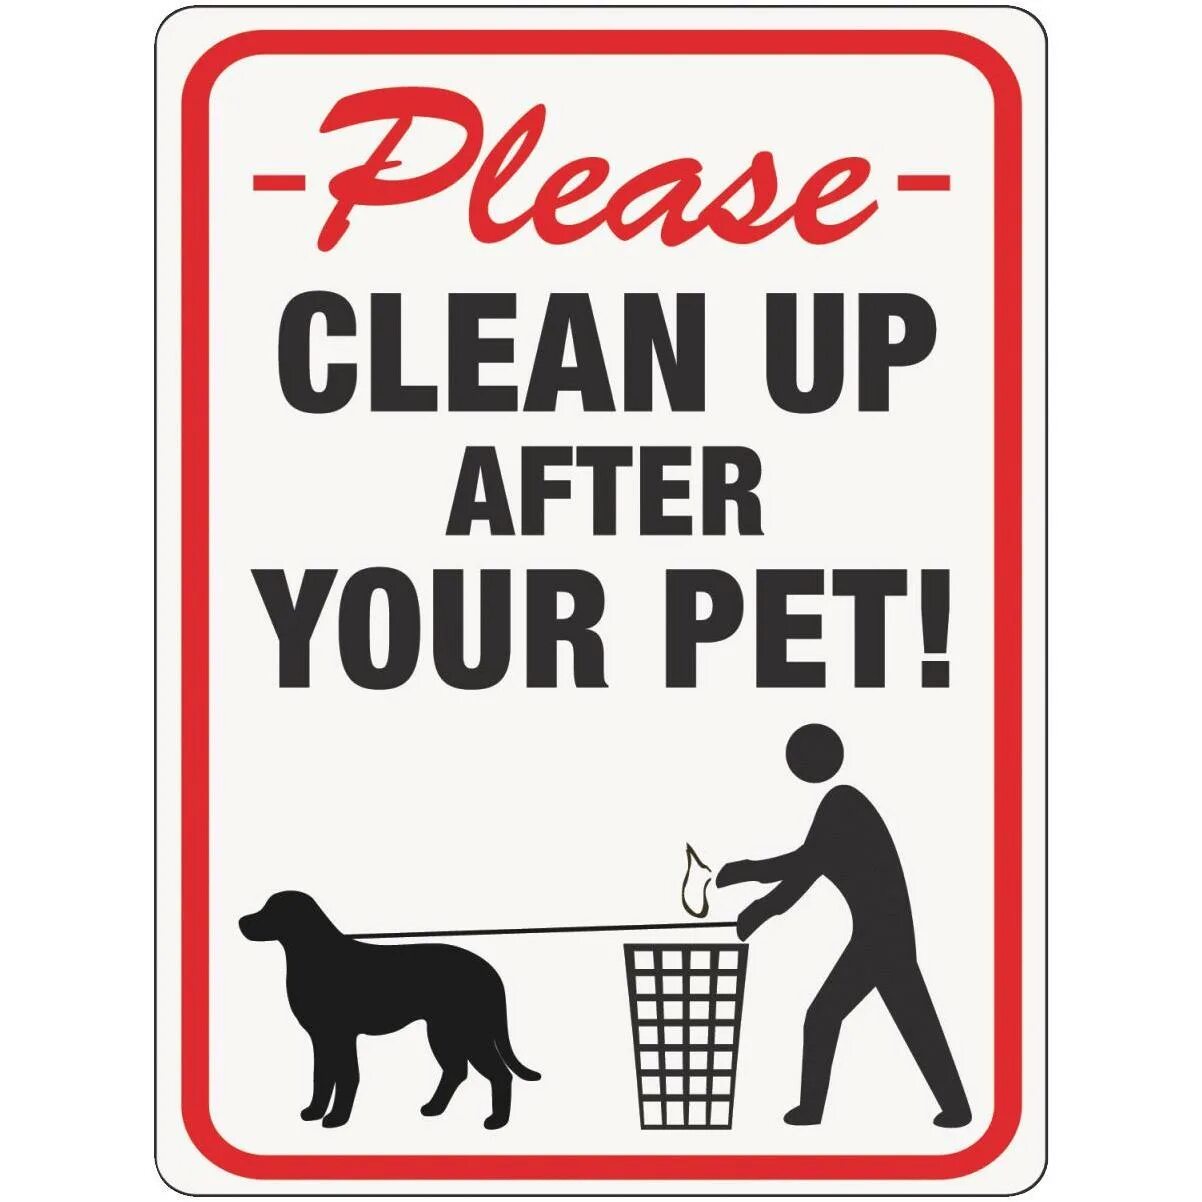 Clean up after your Dog. Please clean up after your Dog sign. Please clean after your Pet. Cleans up after. After your pet